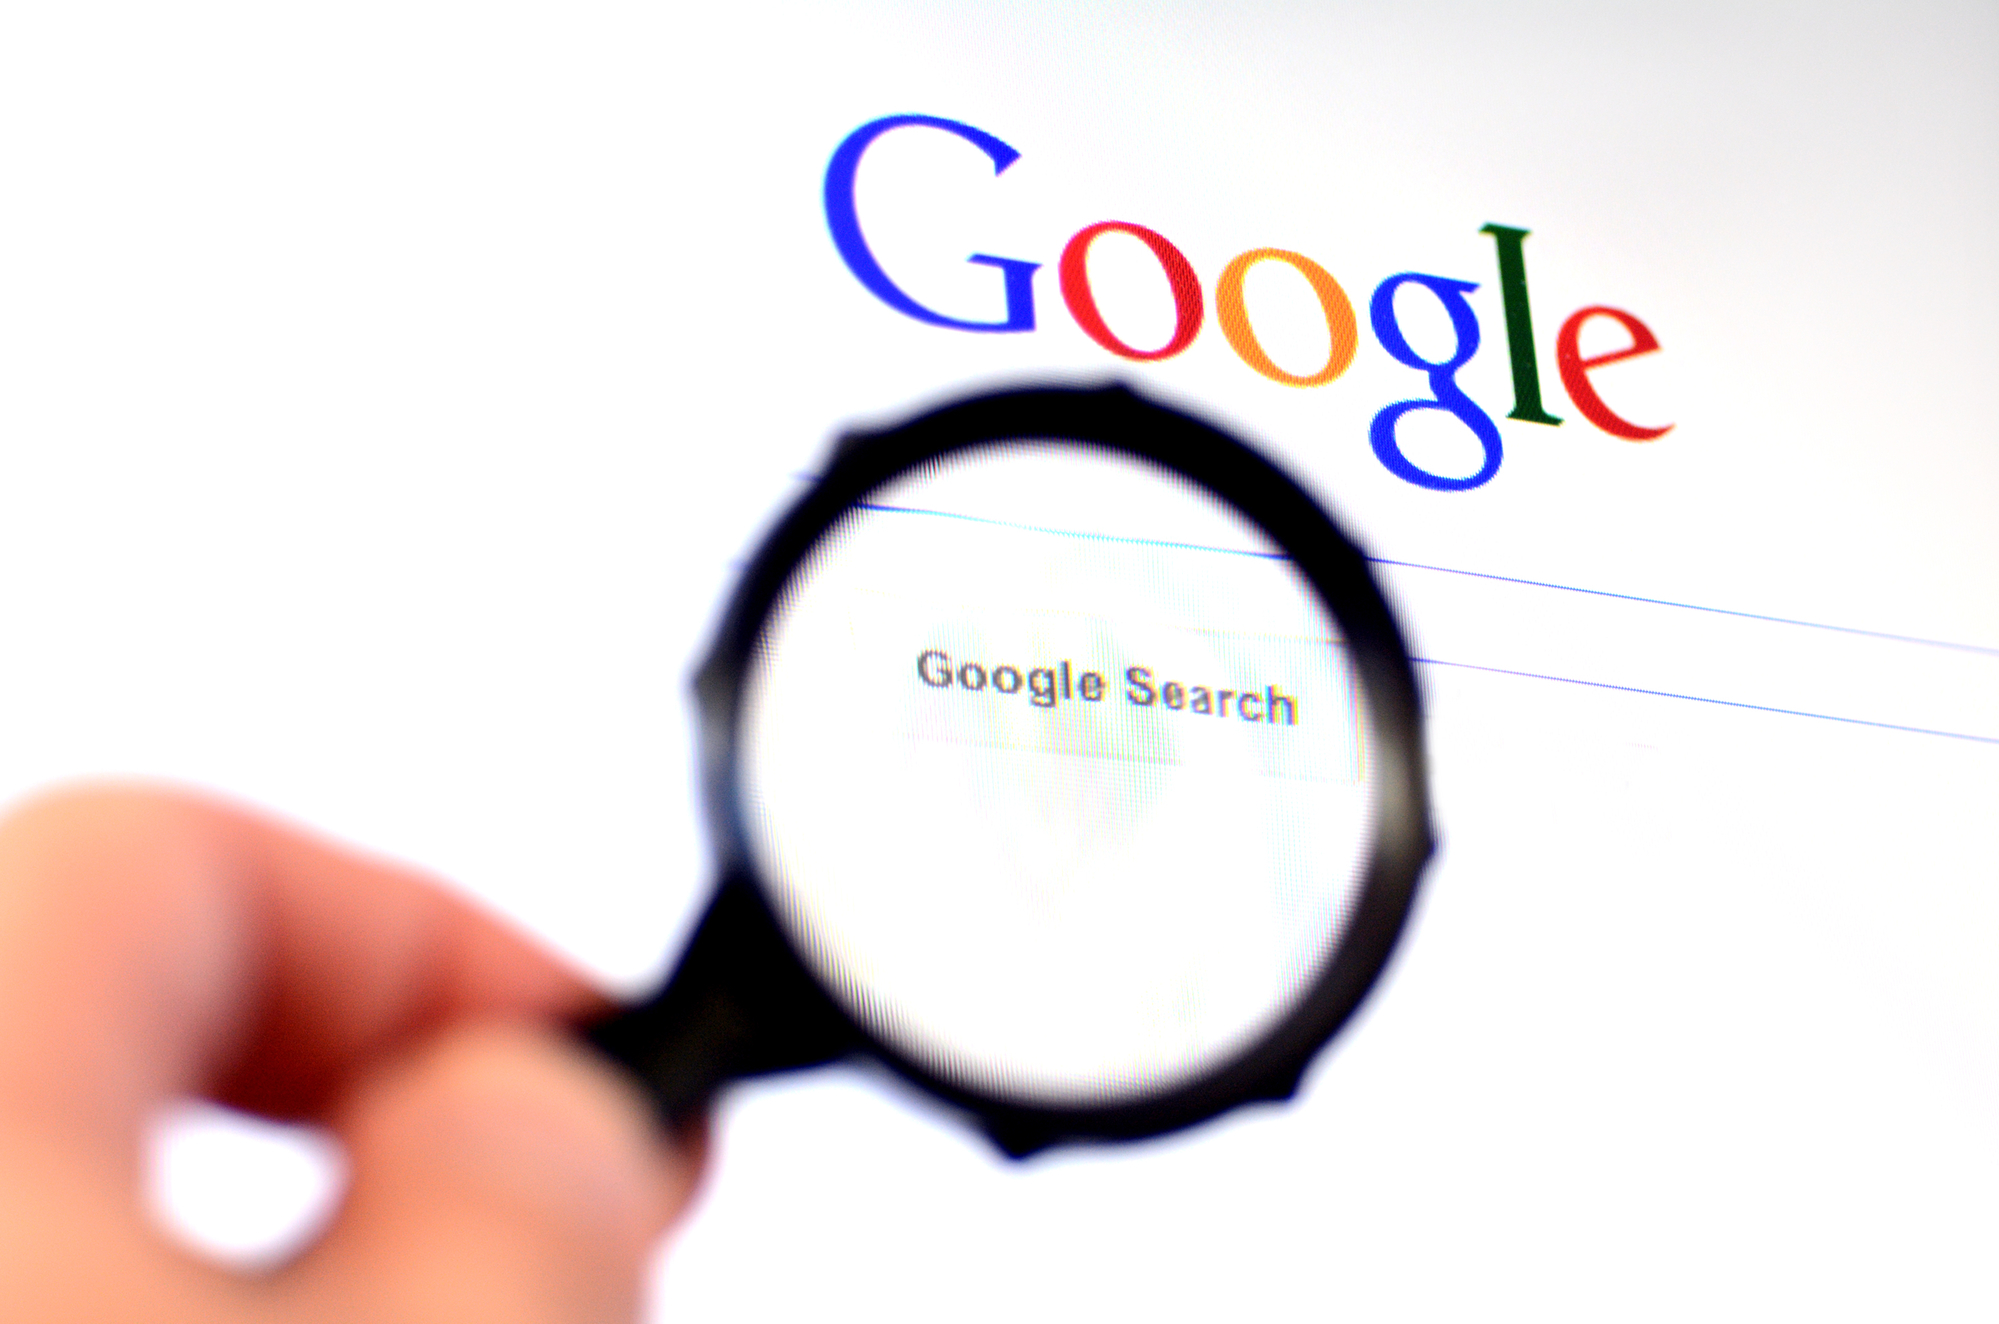 common potential causes of problems in Google Search: